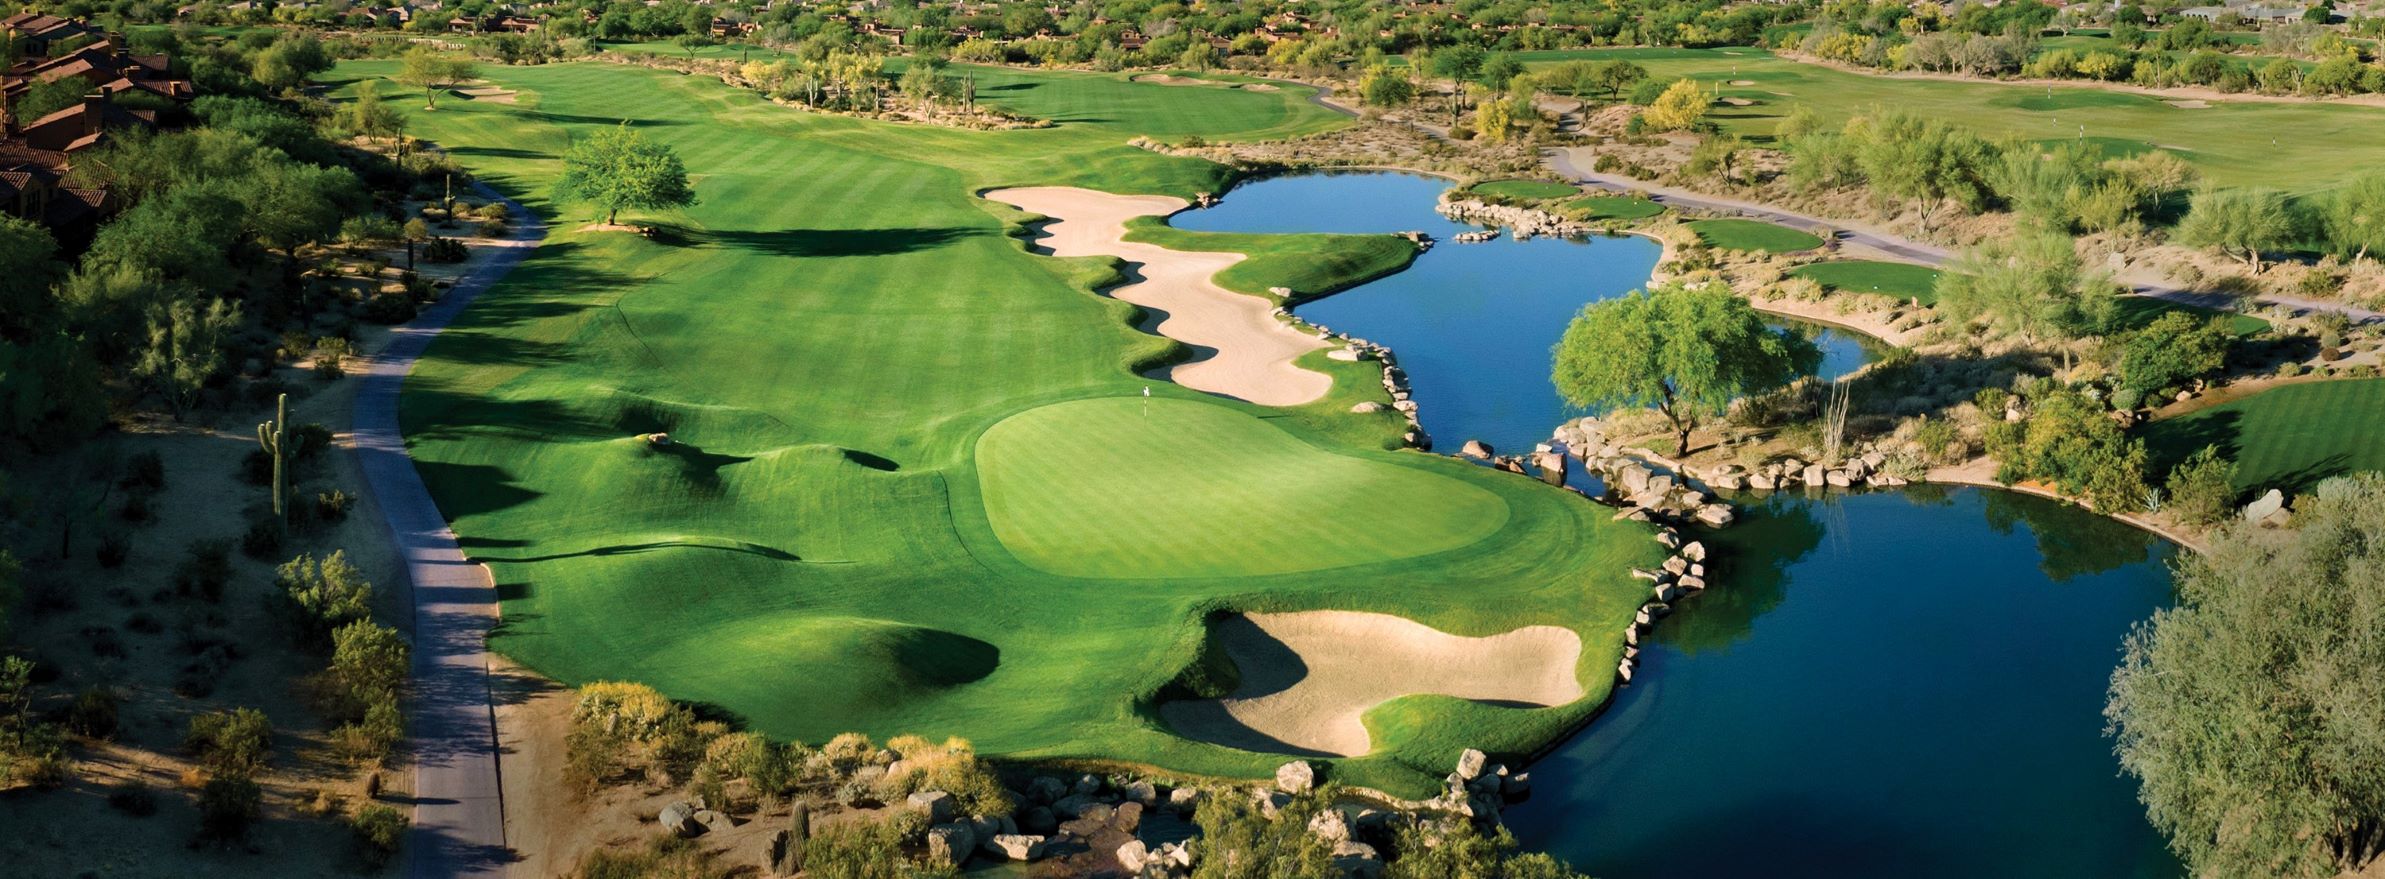 GOLF COURSES REDUCE WATER USAGE BY 29%